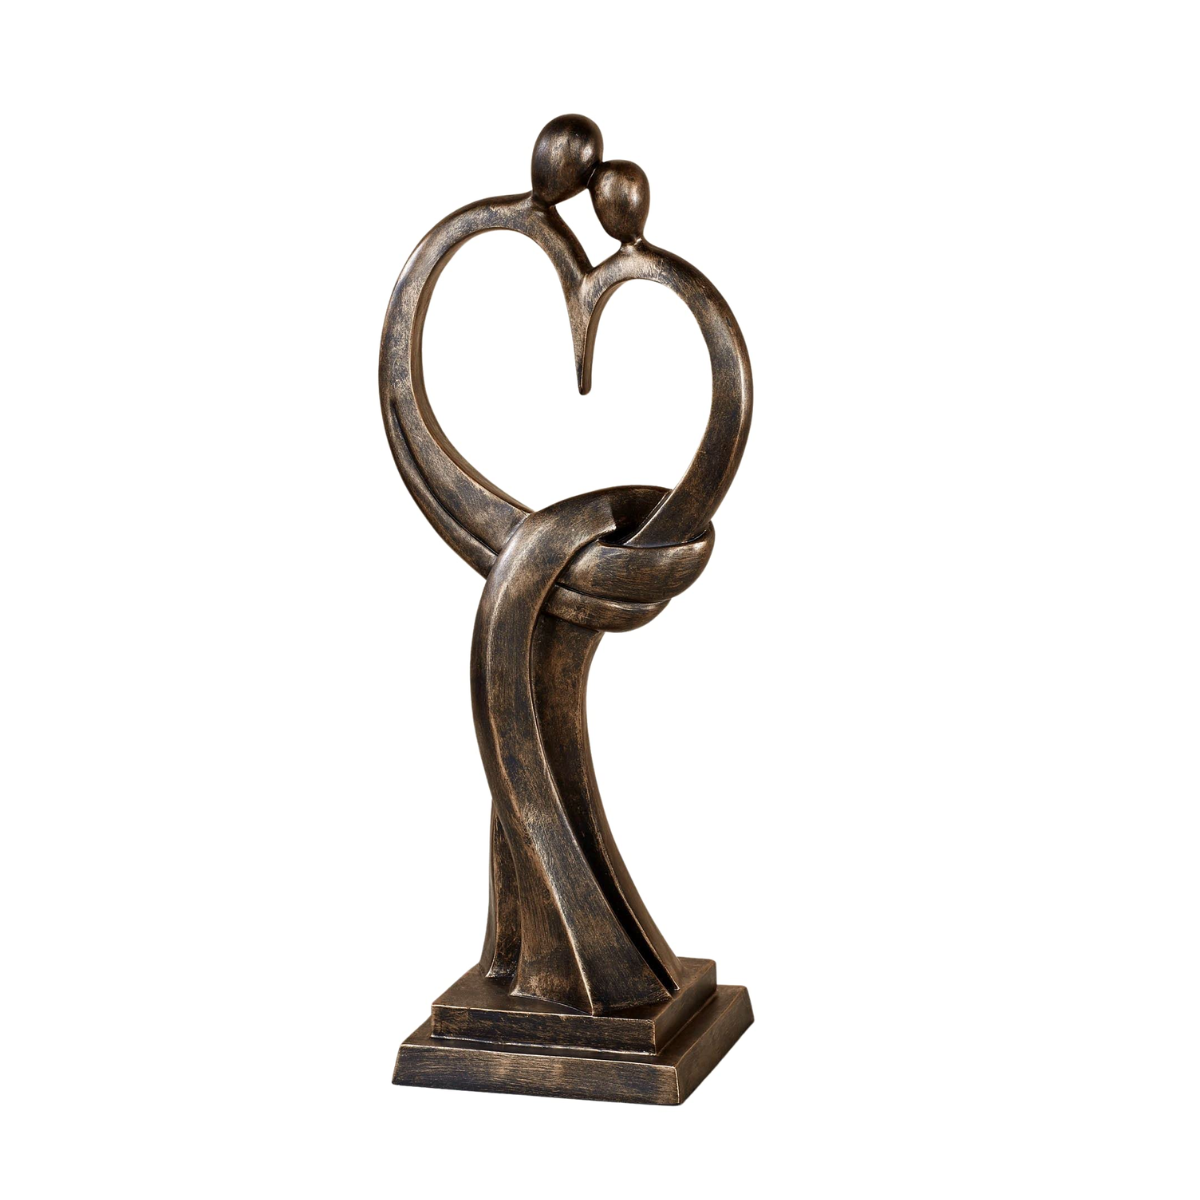 8. Capture Your Love Story with a Stunning Bronze Sculpture - Perfect Anniversary Gift for Him